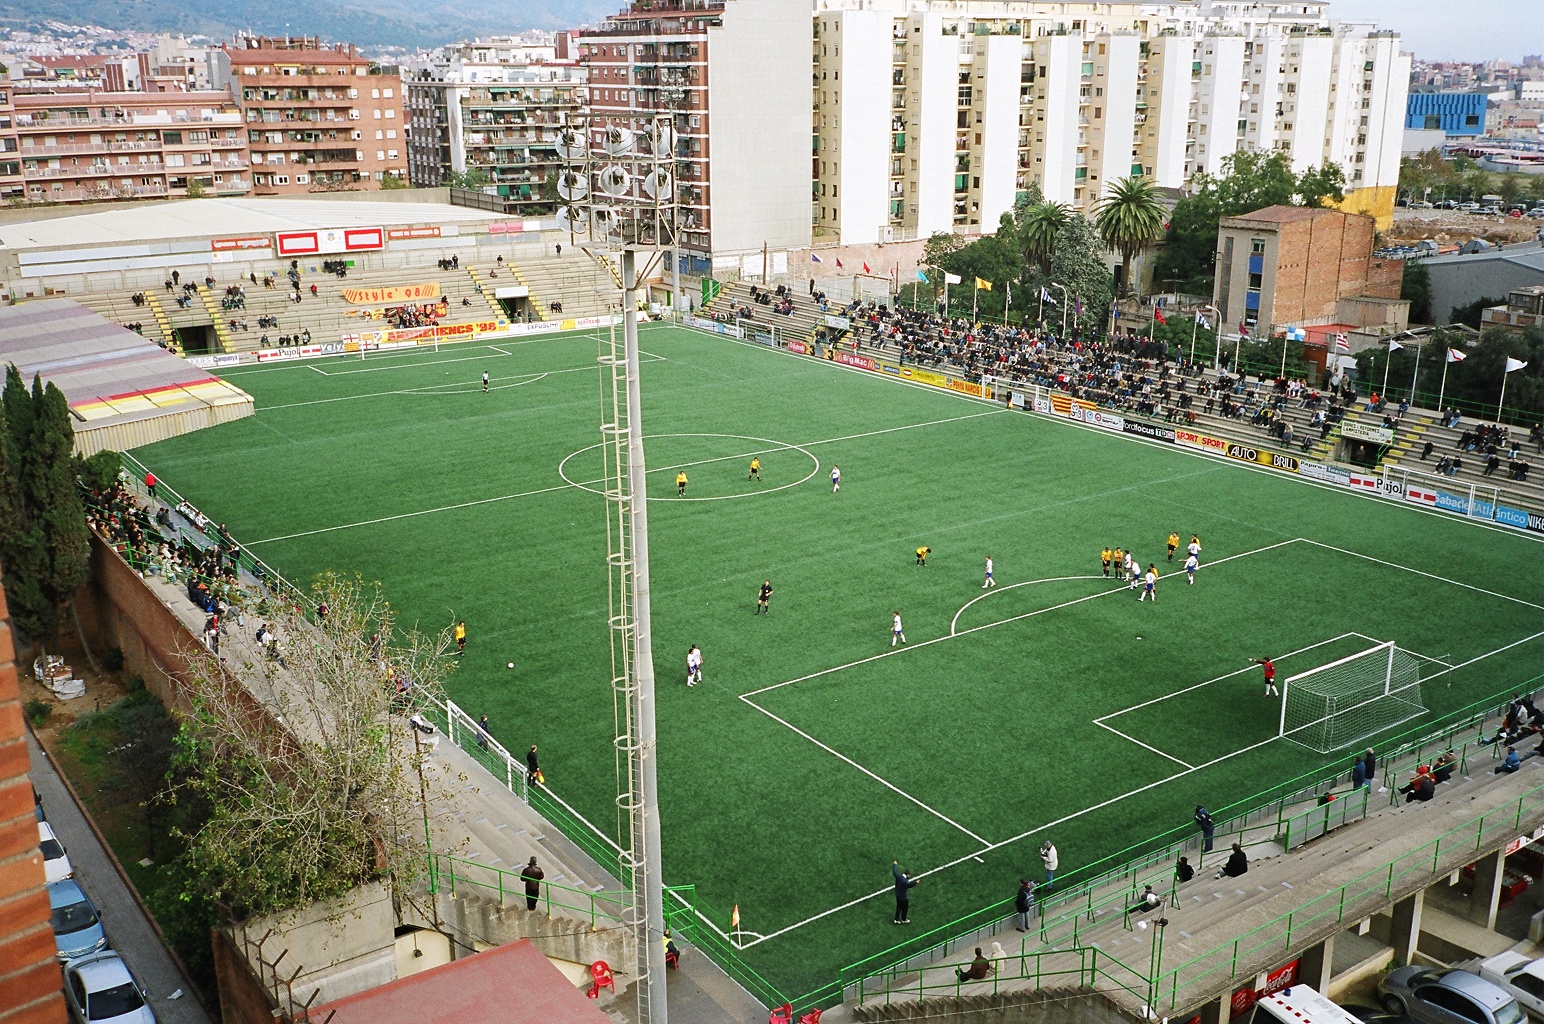 Soccer game in Barcelona, Spain image - Free stock photo - Public Domain photo - CC0 Images